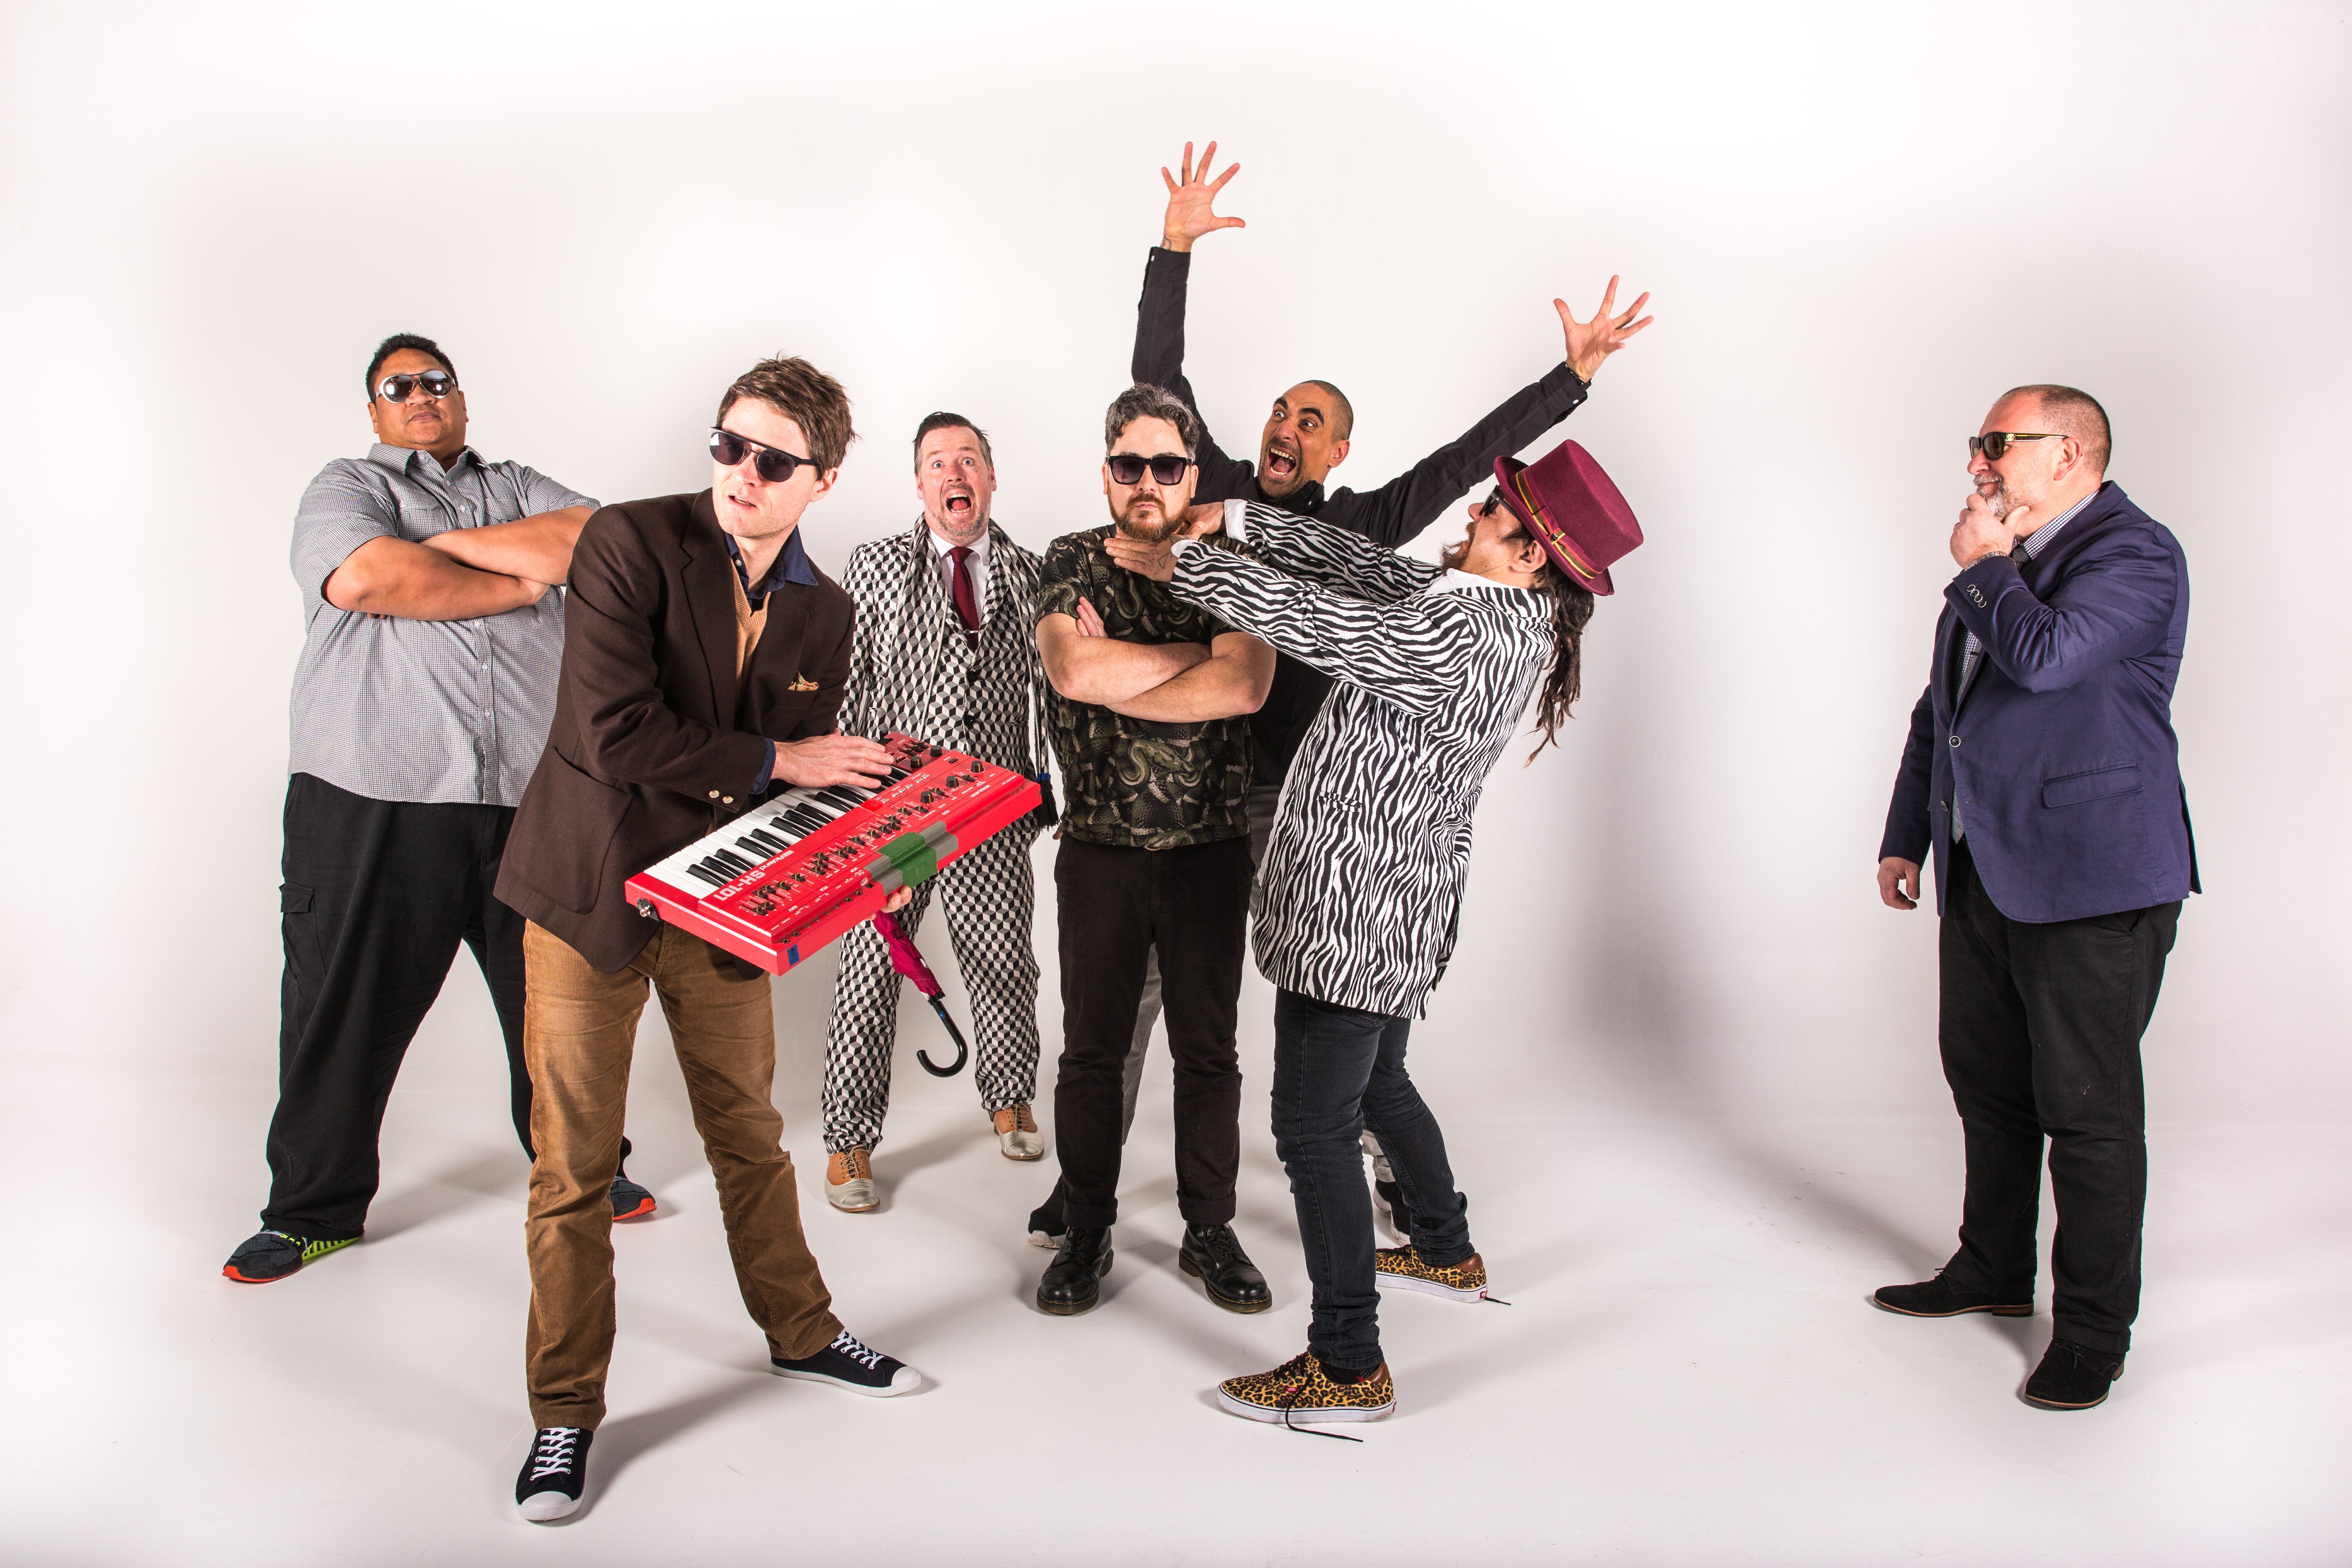 Fat Freddy's Drop in Oxford promo photo for Priority from O2 presale offer code